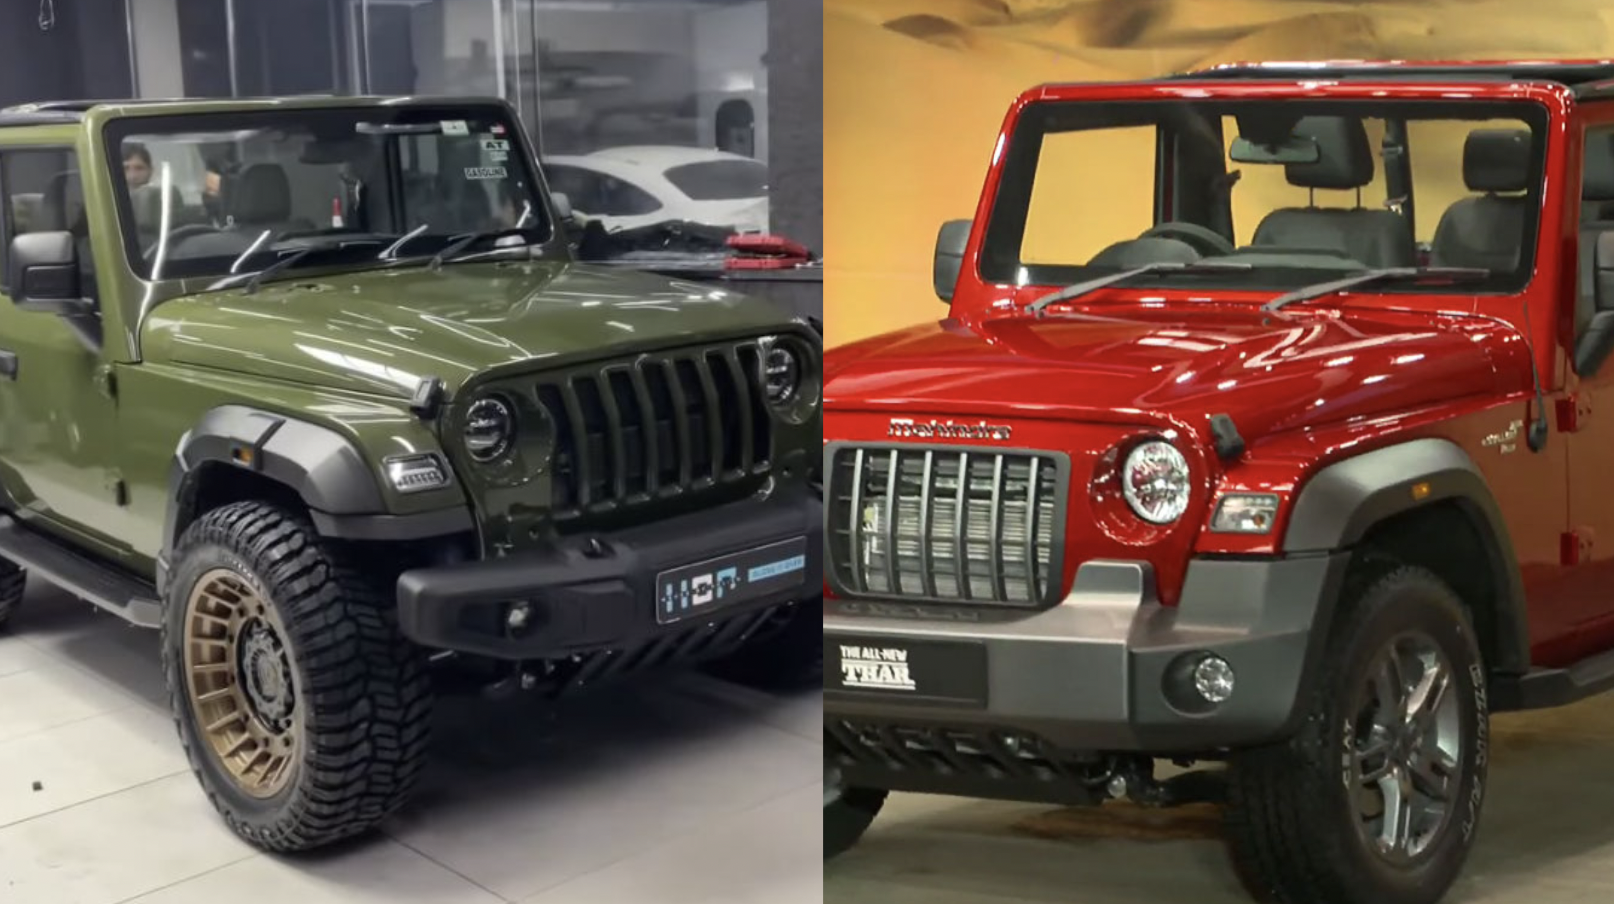 Mahindra threw away its ace of spades, changed the whole body of its old Mahindra THAR vehicle
